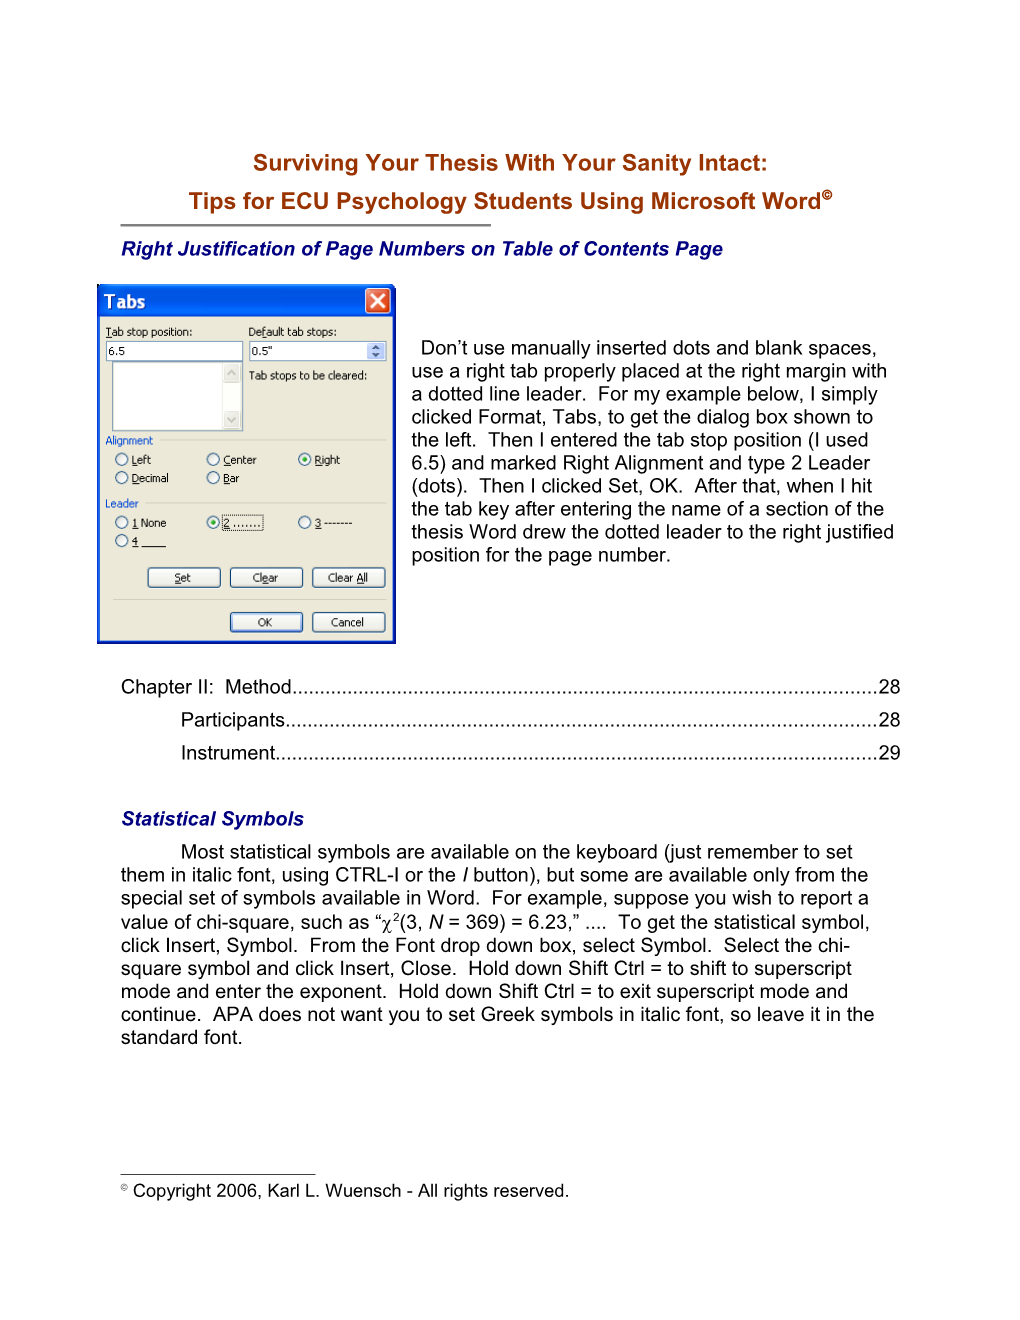 Tips for ECU Psychology Students Using Microsoft Word